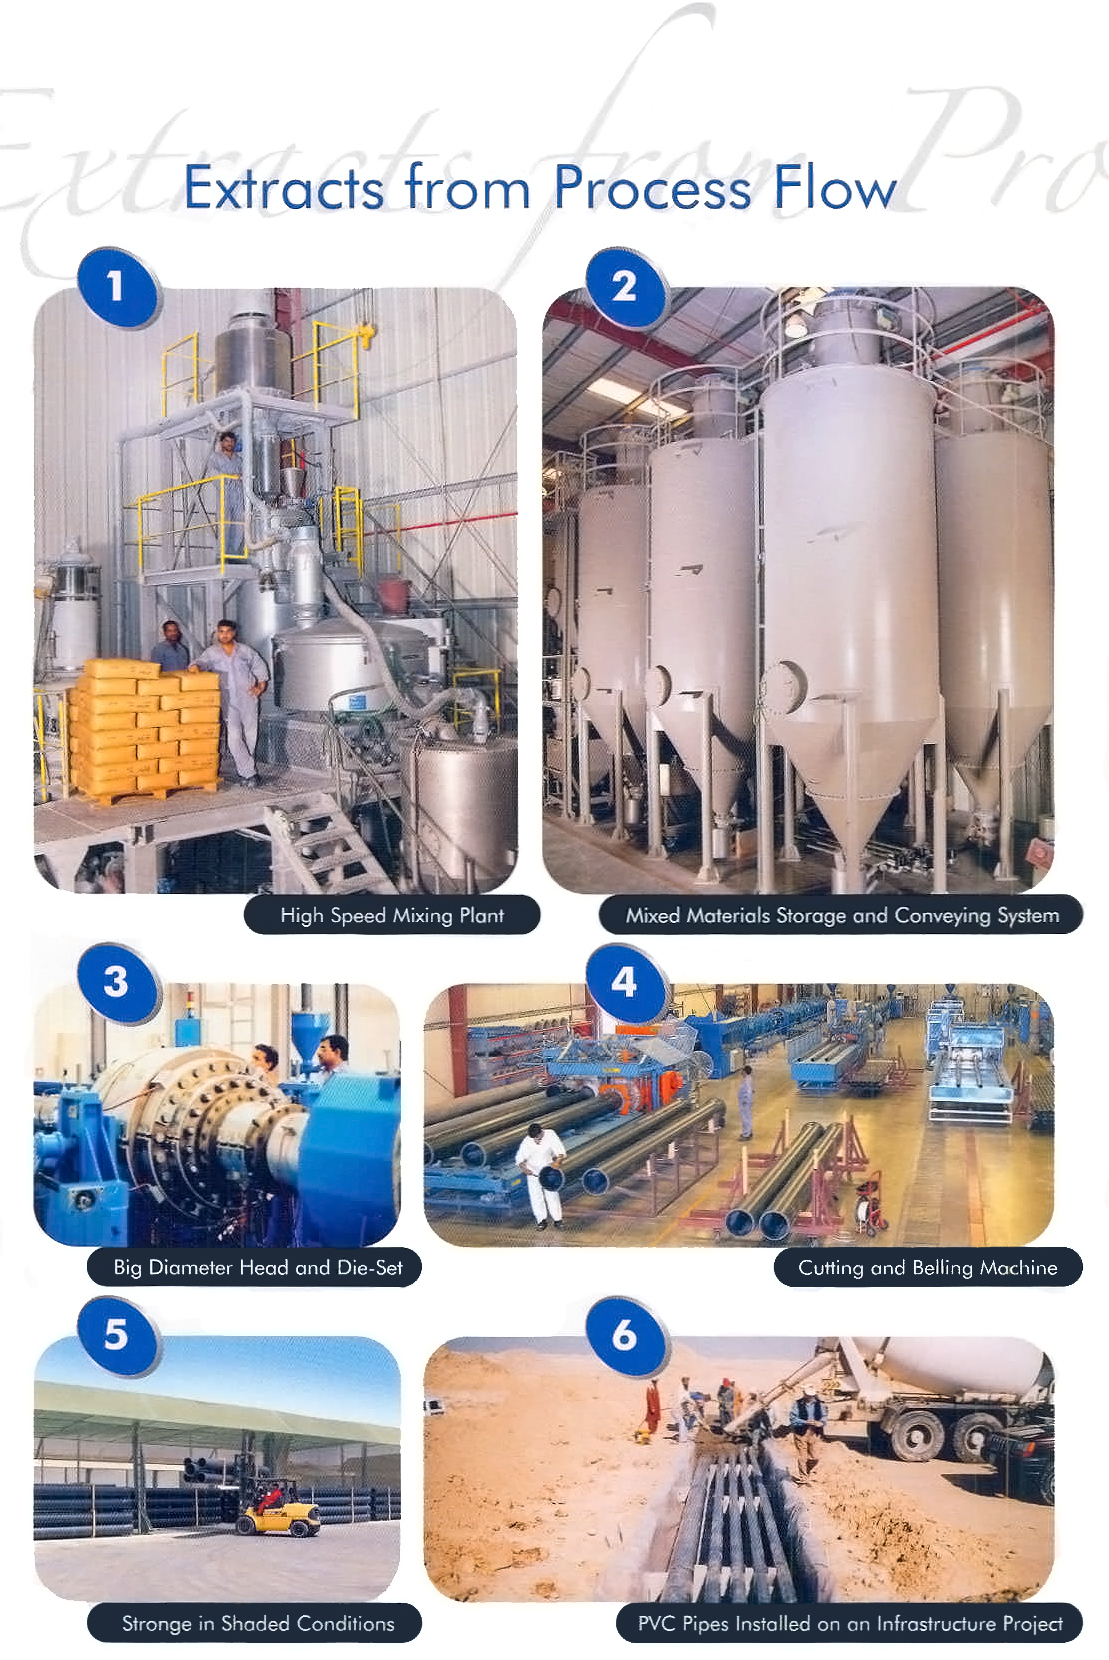 http://www.hedley-international.com/images/epc/process/extracts_process_flow.jpg